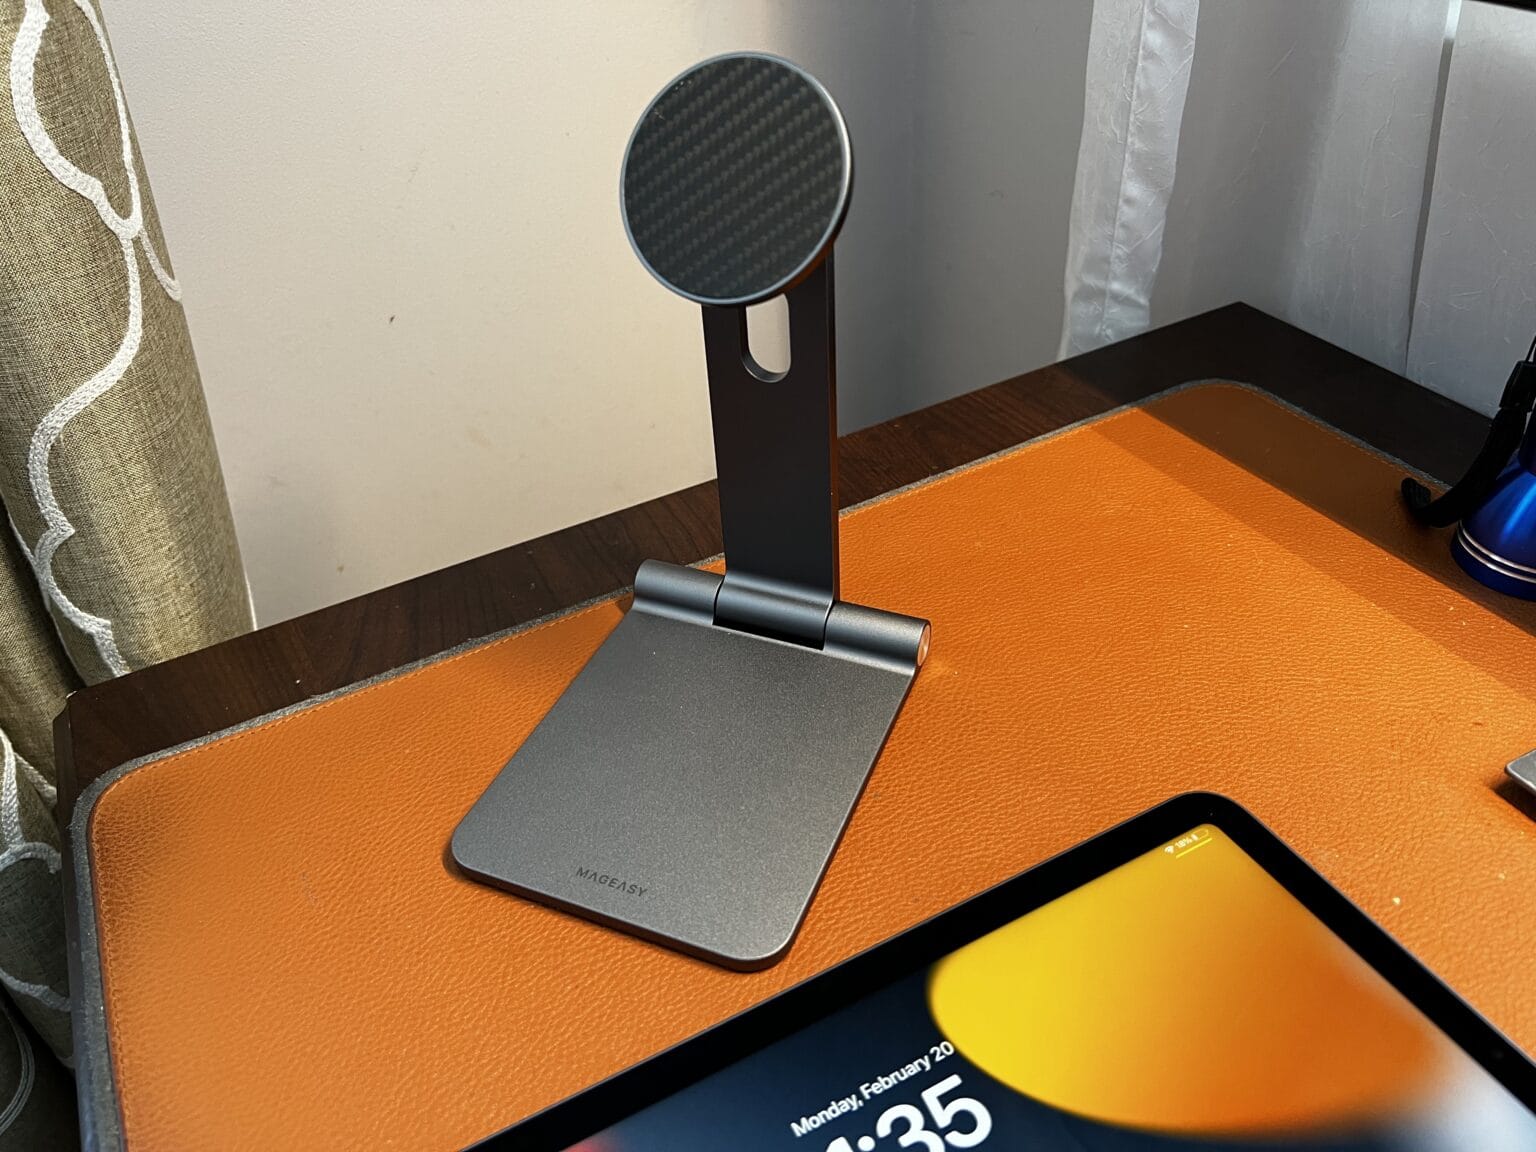 SwitchEasy's MagEasy Flipmount is a sturdy stand for iPads, iPhones and other devices.